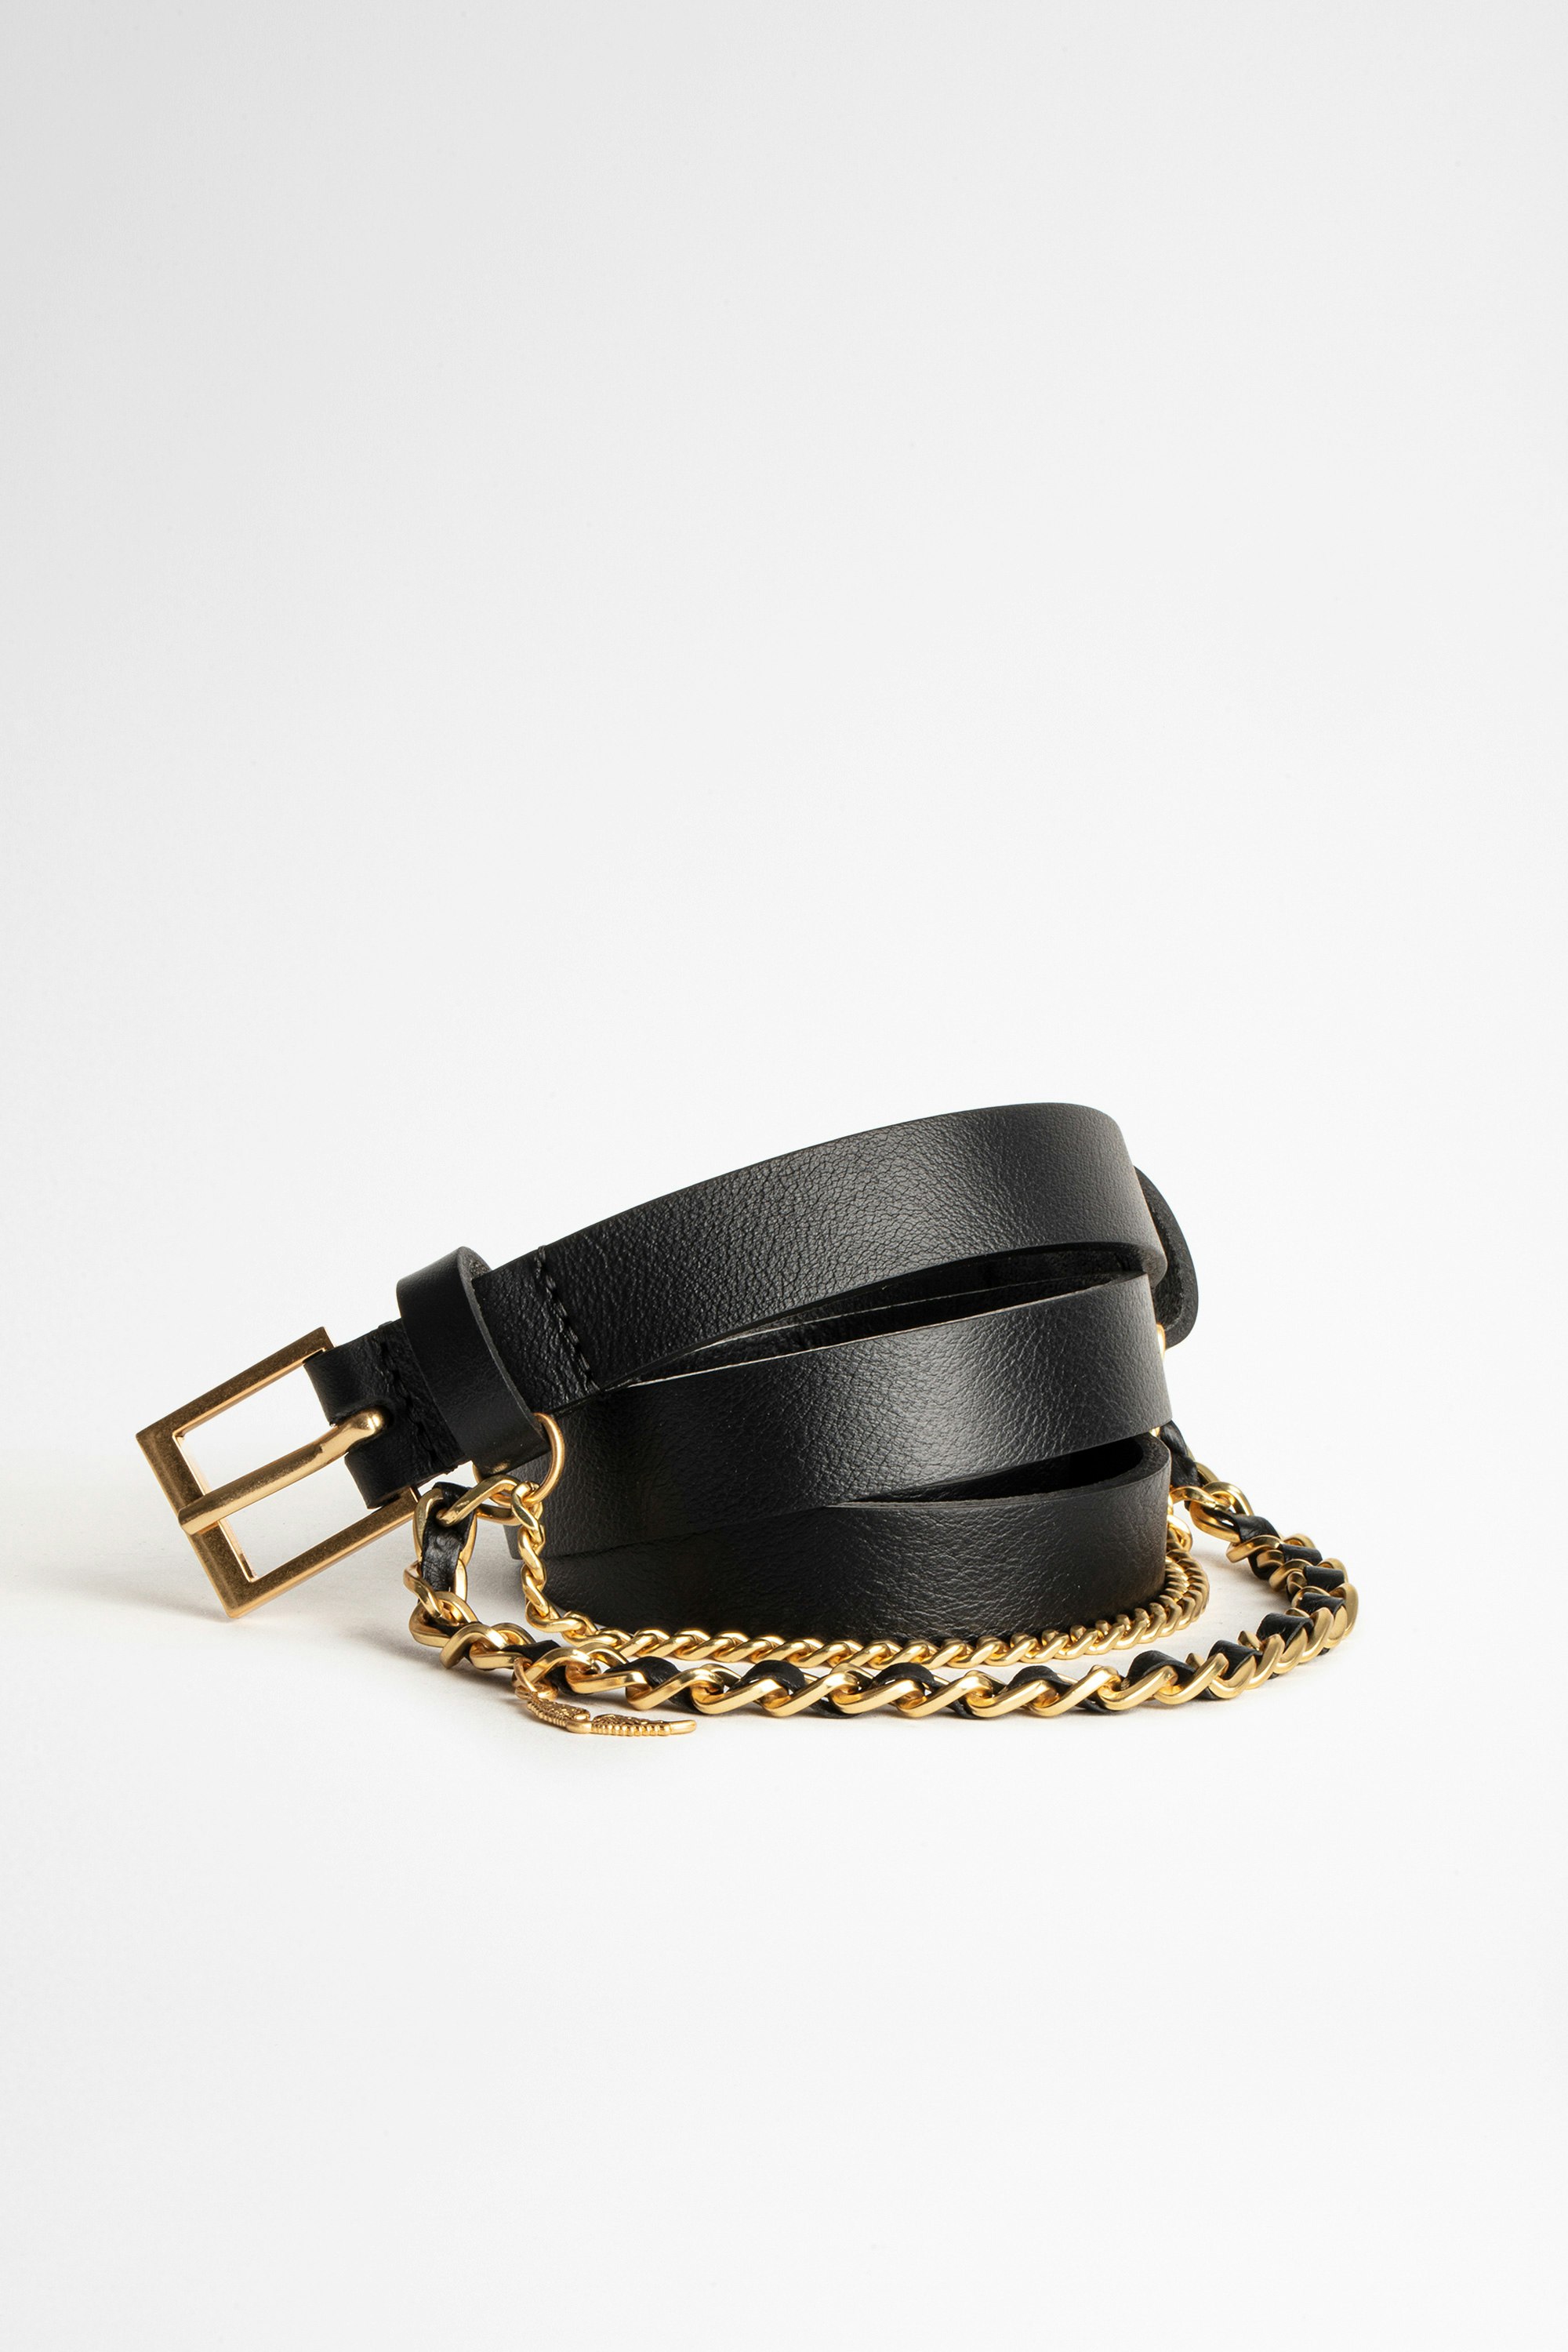 Rock Chain Belt Zadig&Voltaire black leather belt with gold chain.